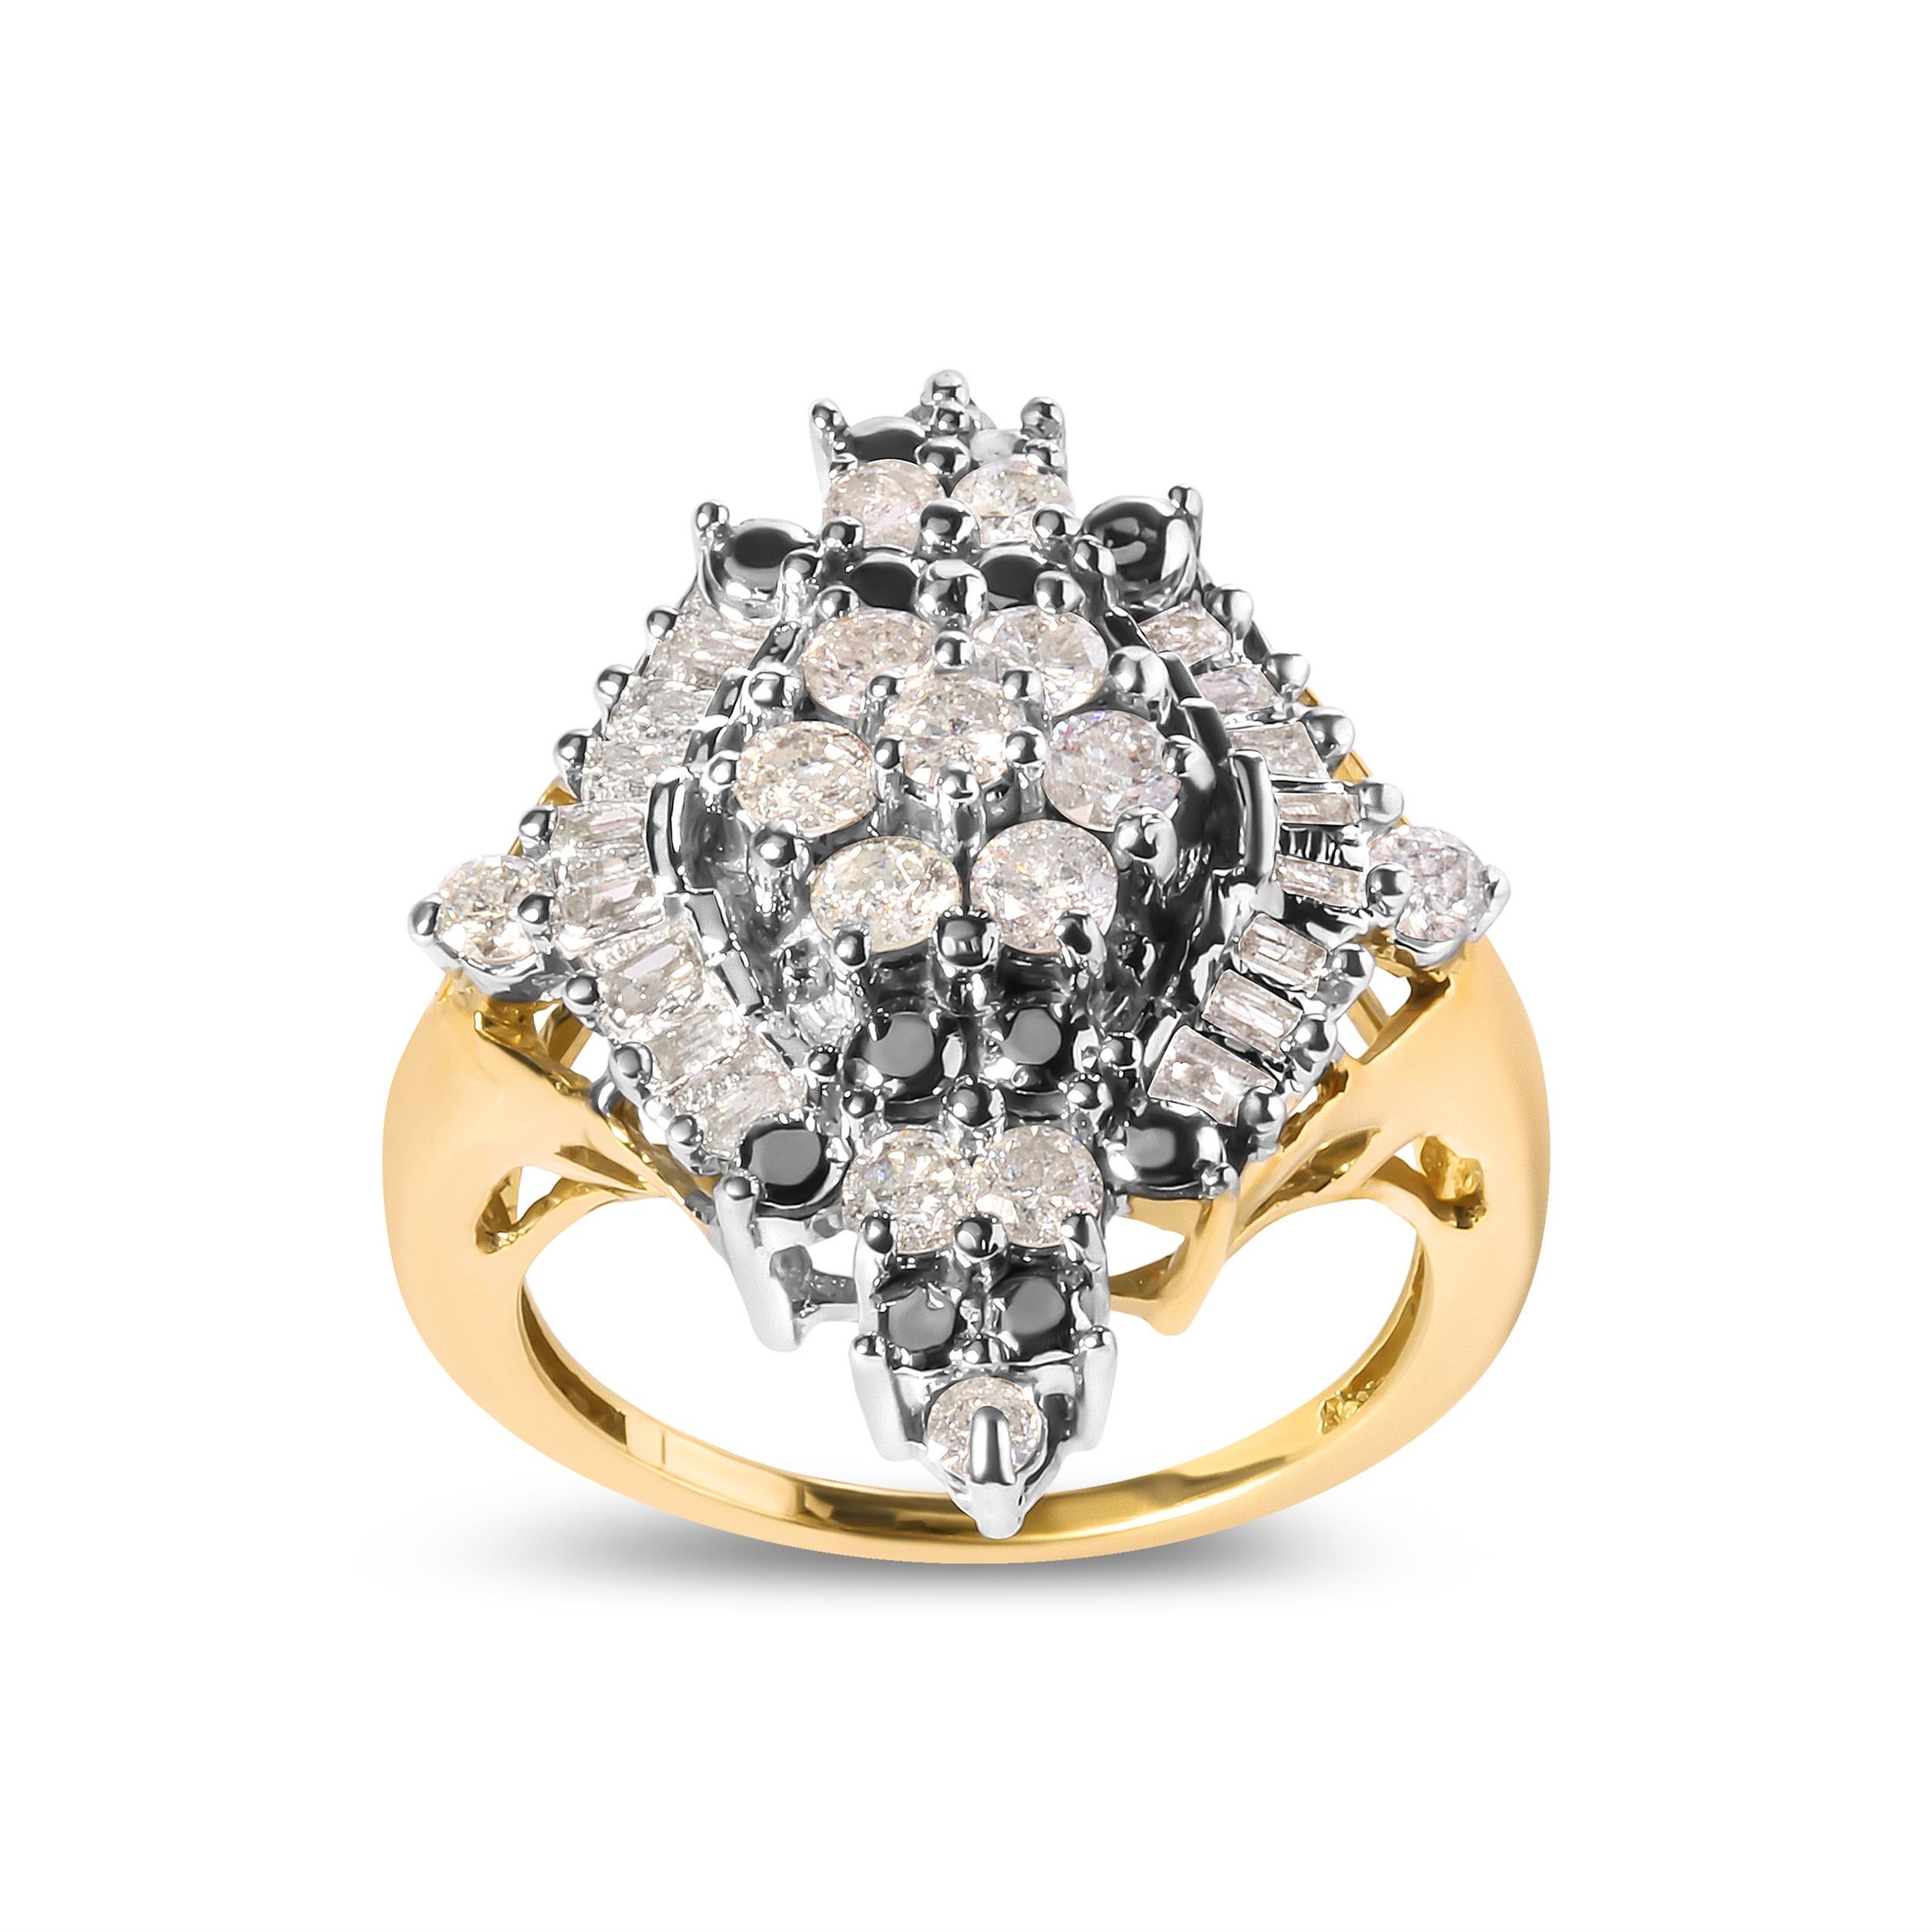 Indulge in the luxurious elegance of this stunning cocktail ring. Crafted from 10K yellow gold, this piece features a dazzling array of 31 natural diamonds, totaling 1 carat in weight. The round and baguette cut diamonds are expertly arranged in a